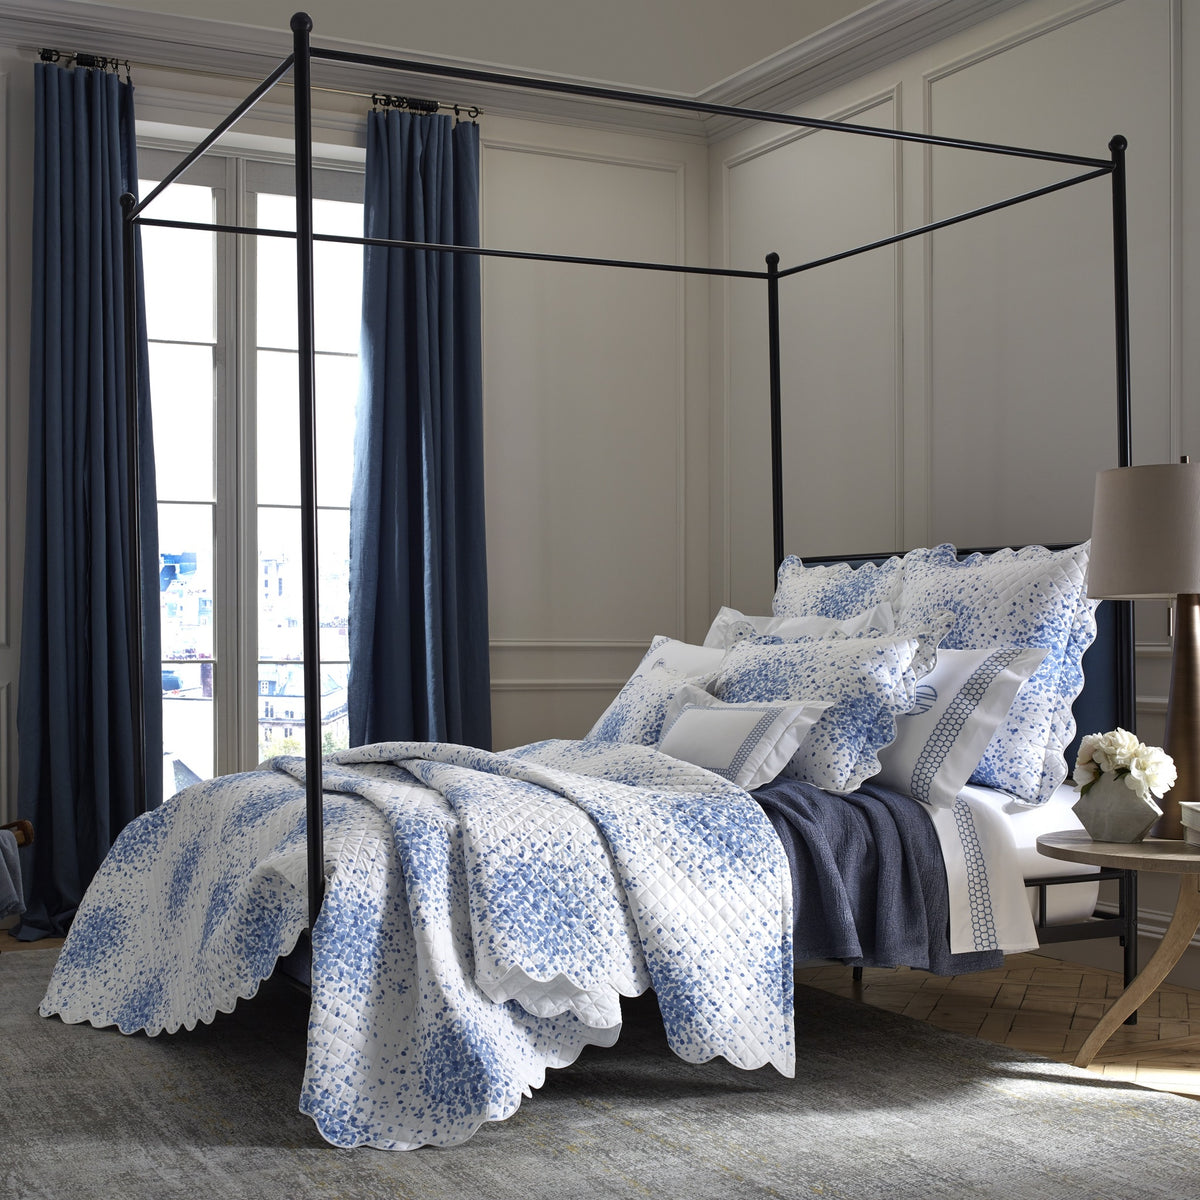 Full Bed with Matouk Poppy Shams and Coverlet in Azure Color Together with Liana Collection